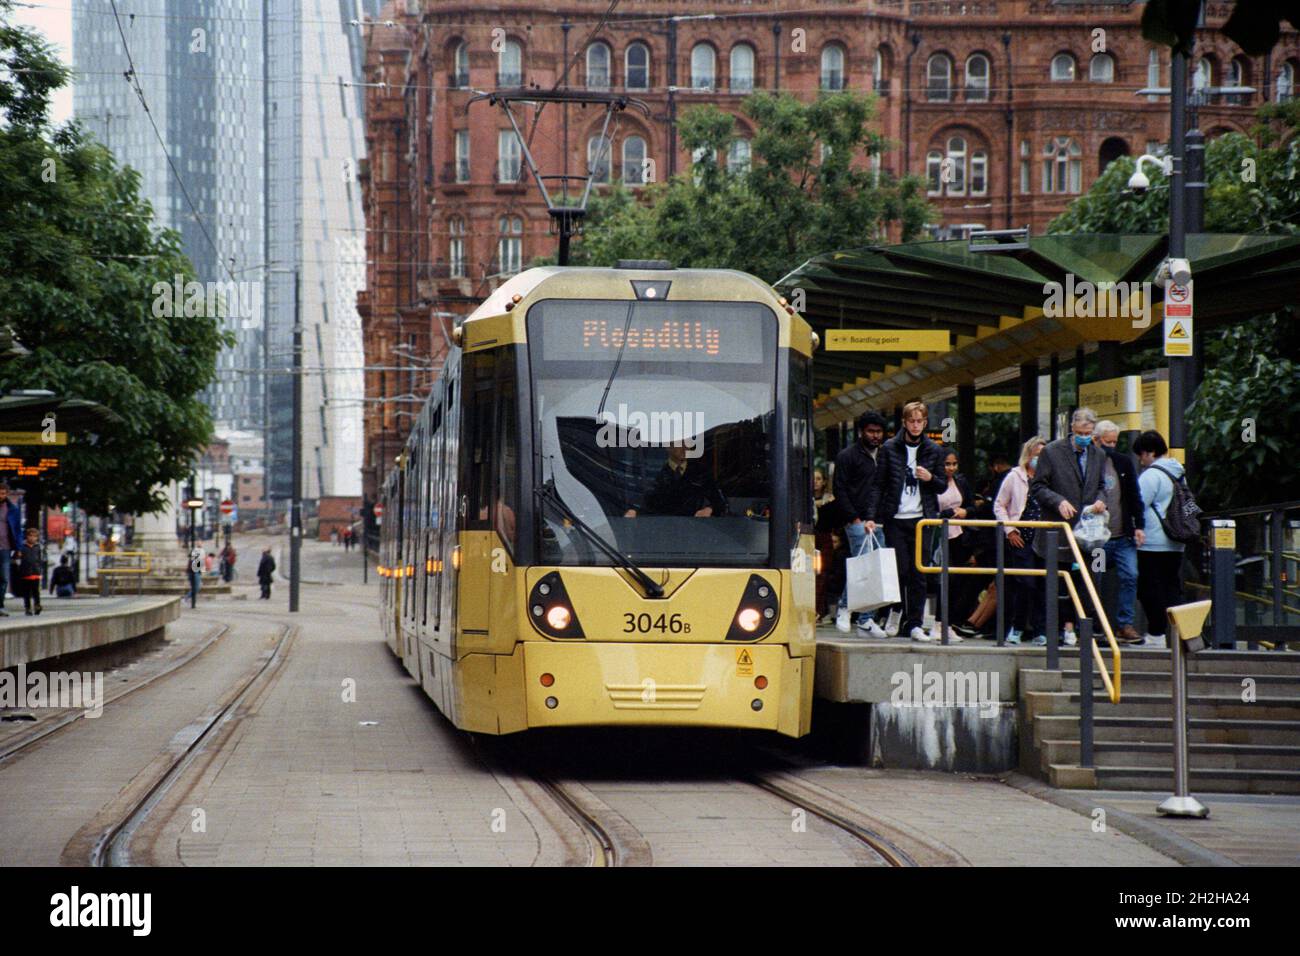 Manchester, UK - 21 August 2021: A tram (Bombardier M5000, no. 3046) at St Peter's Square tram stop. Stock Photo